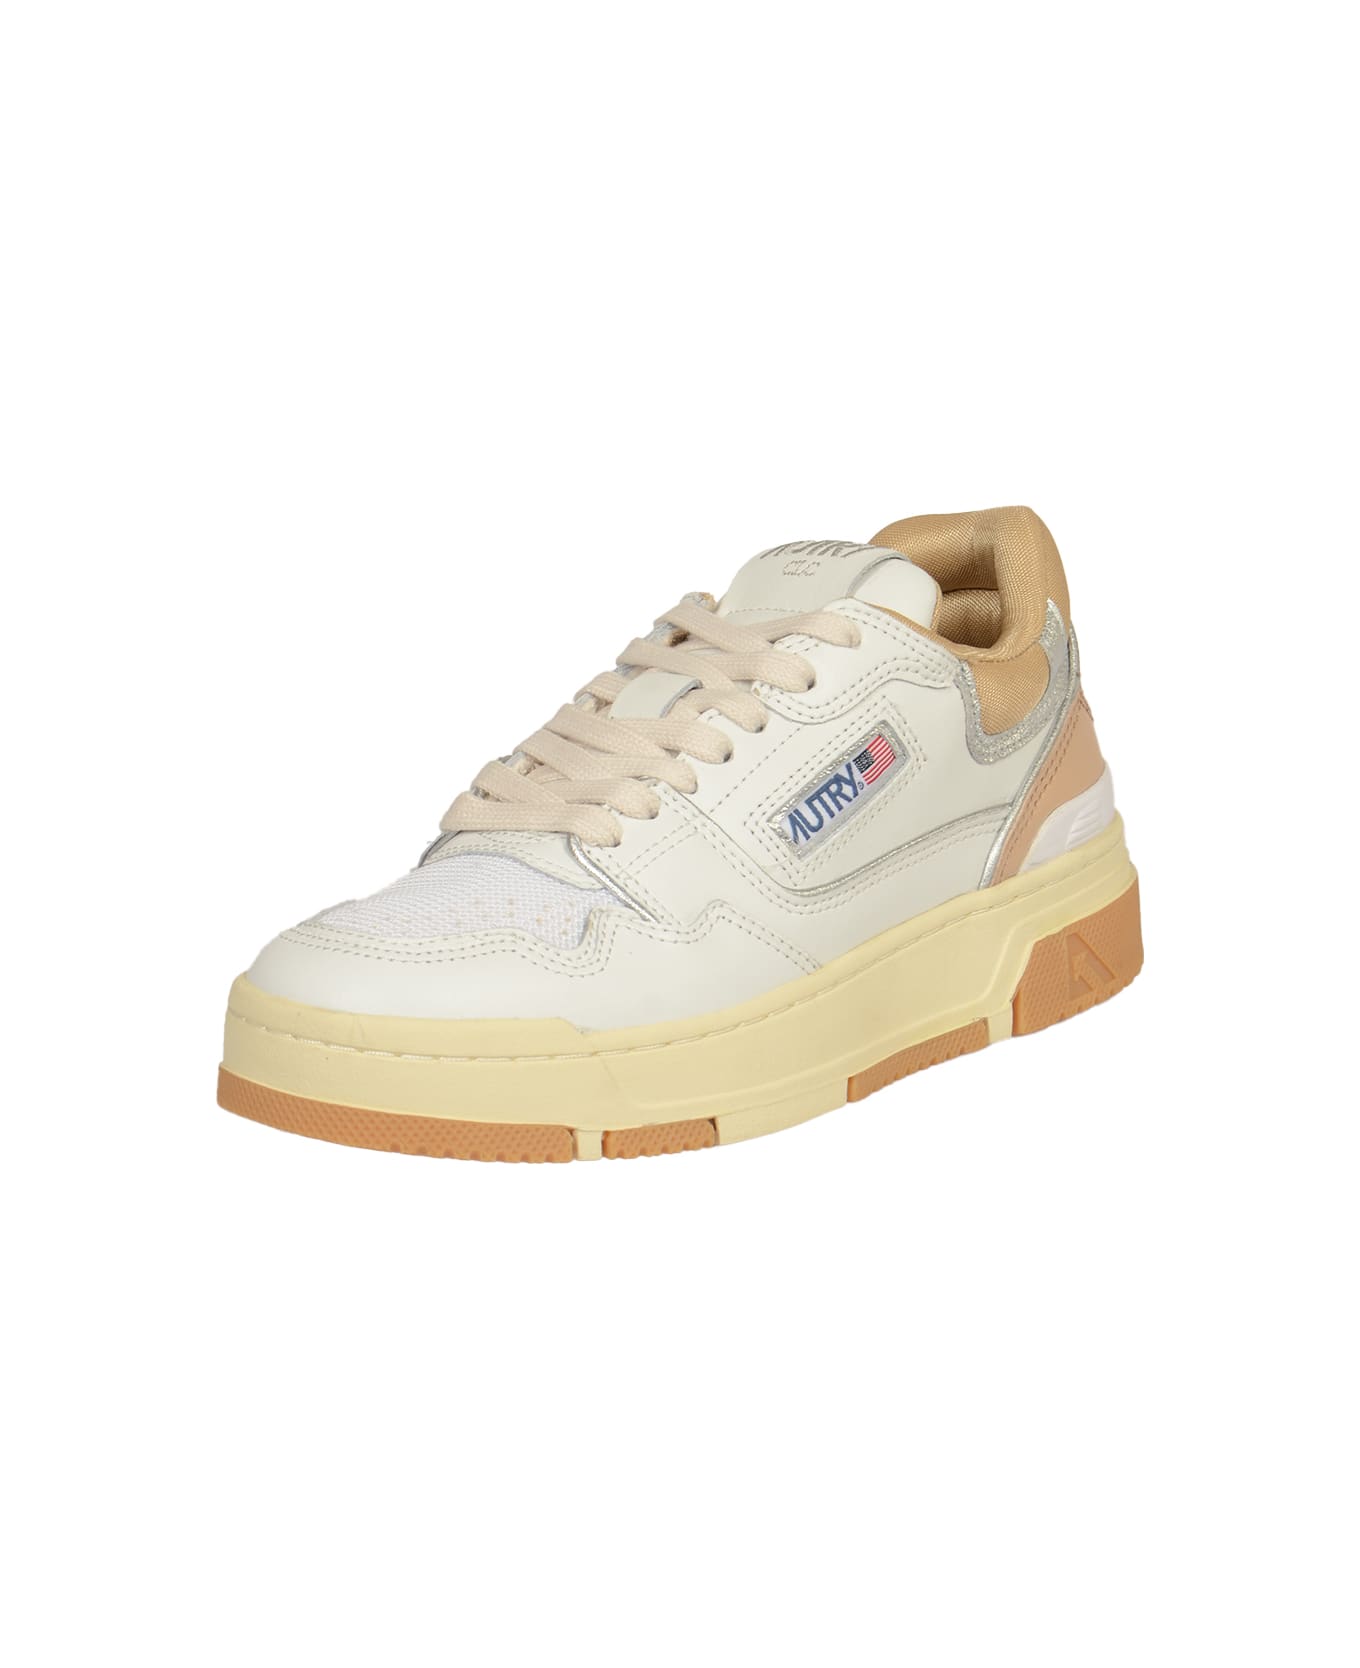 Autry Clc Low Sneakers - Wht/silv/candging スニーカー